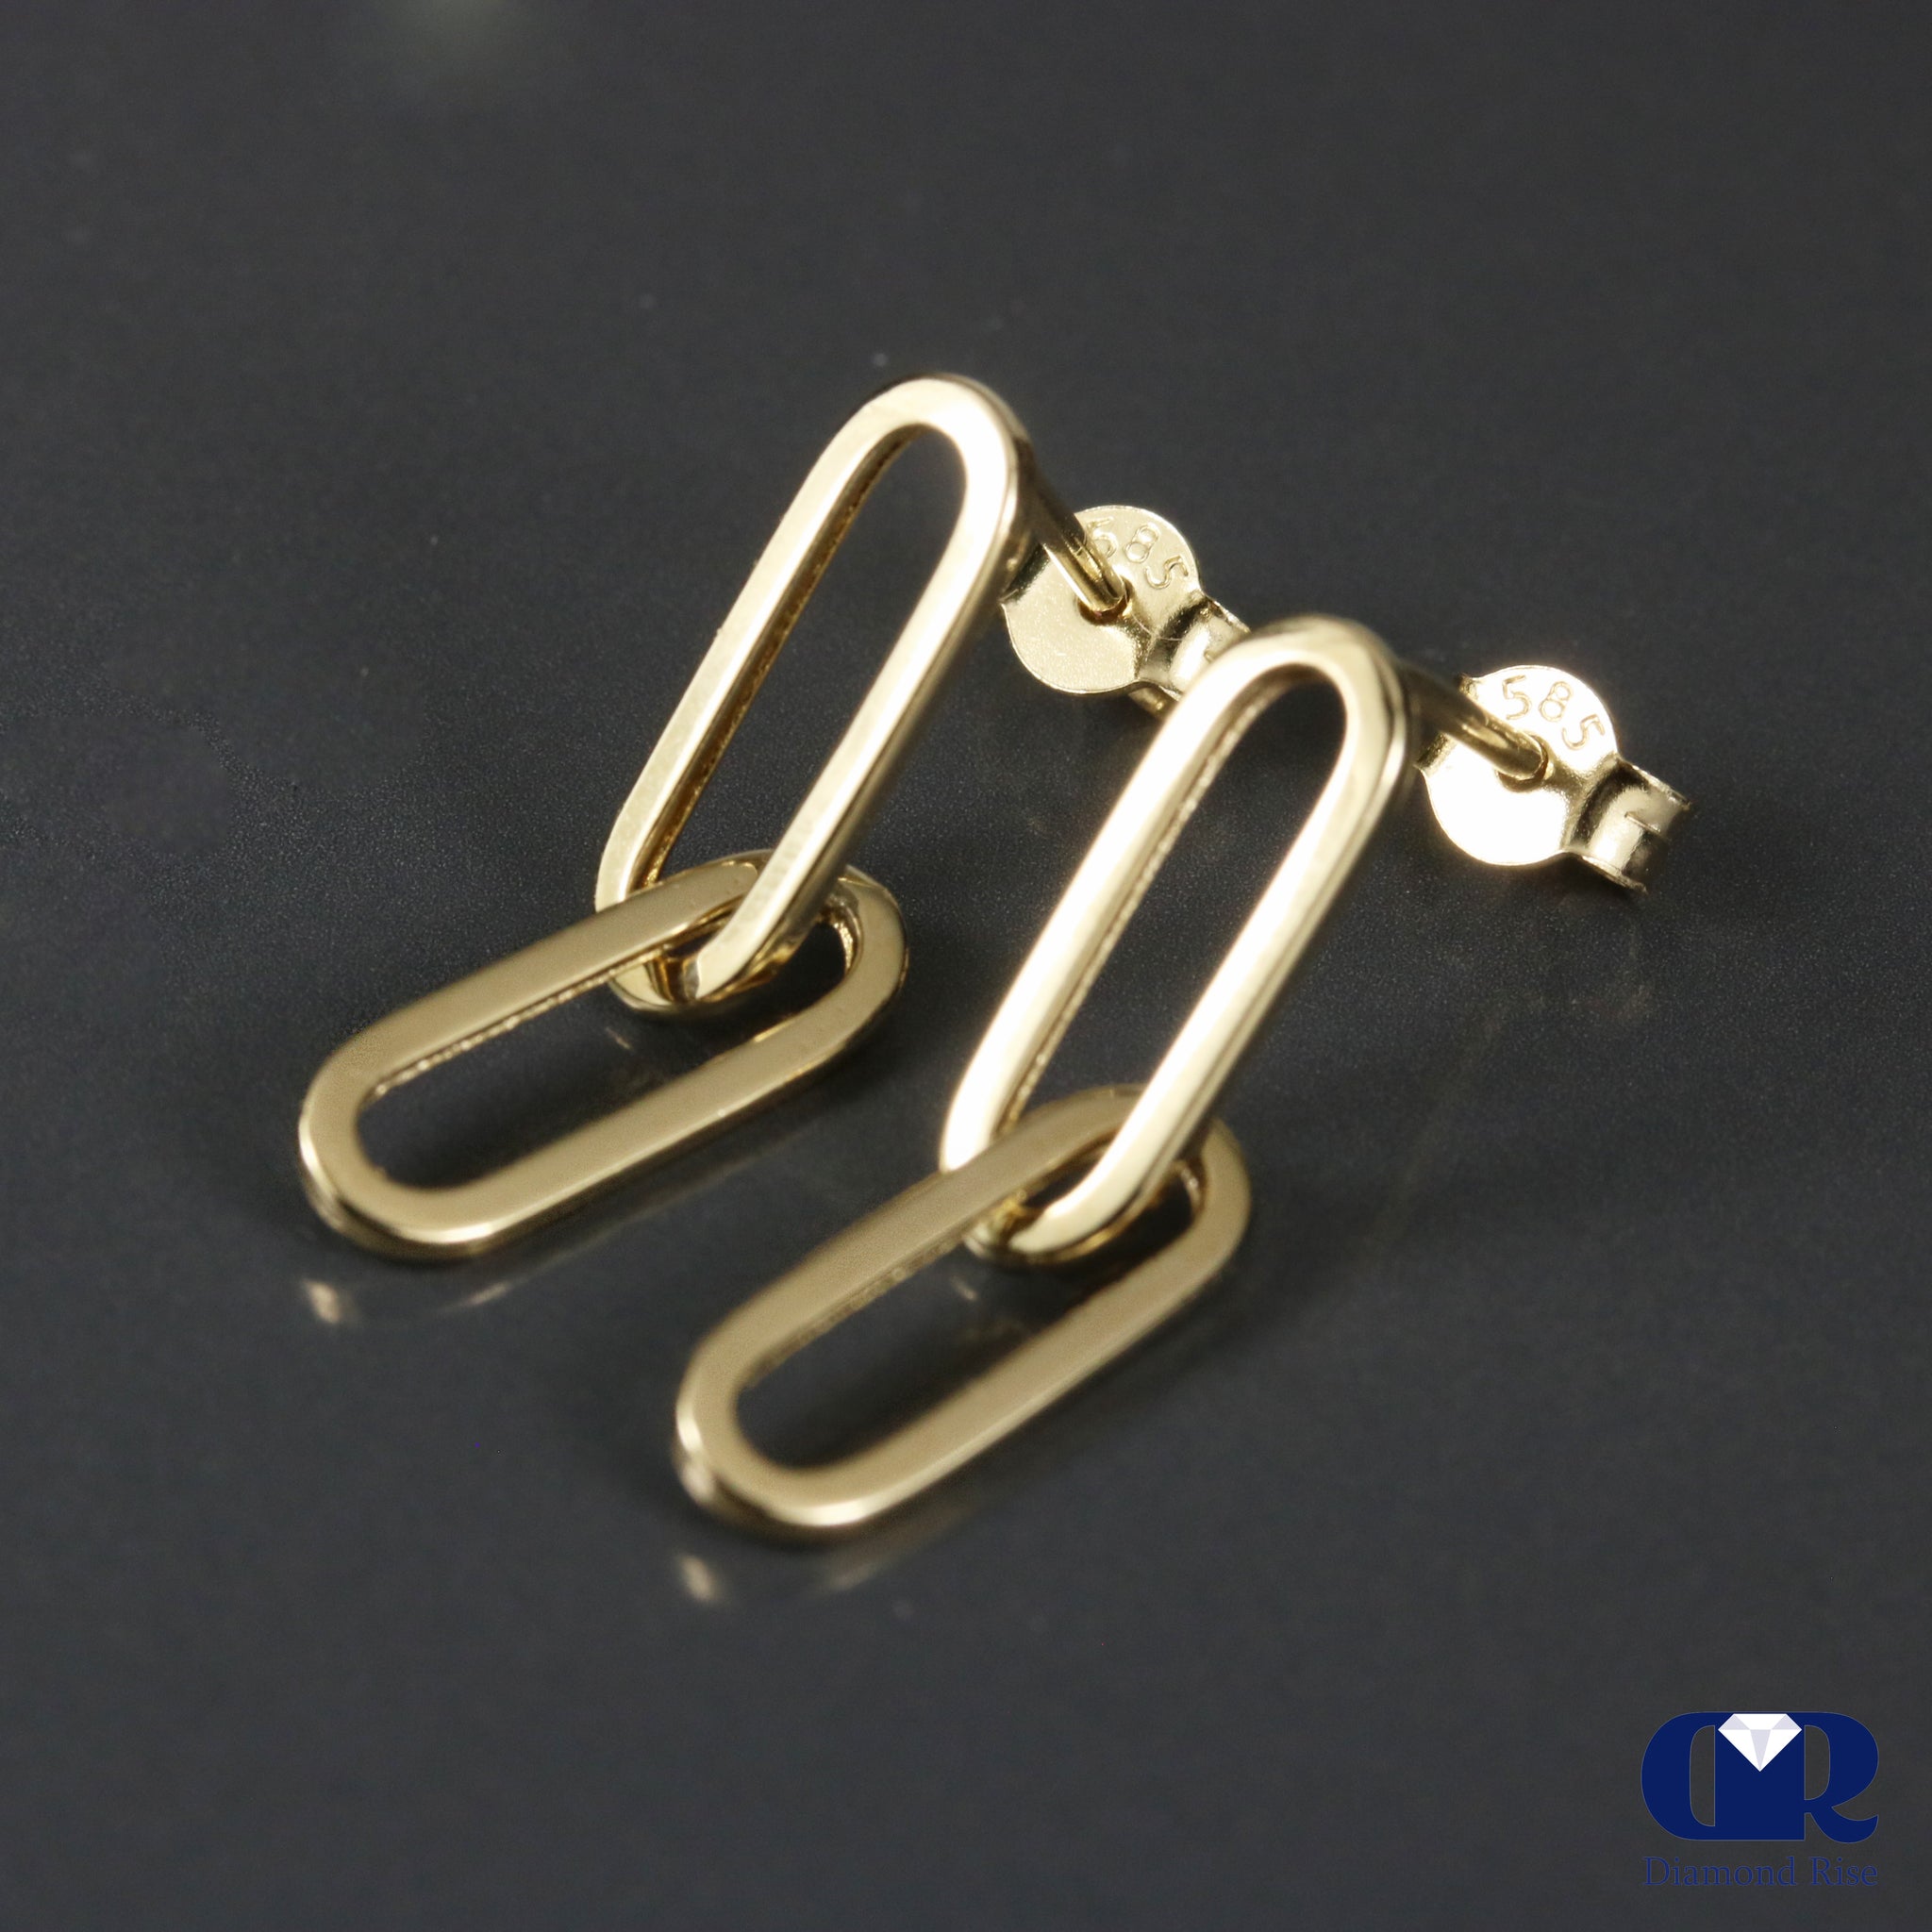 Solid Gold Safety Pin Dangle Earrings